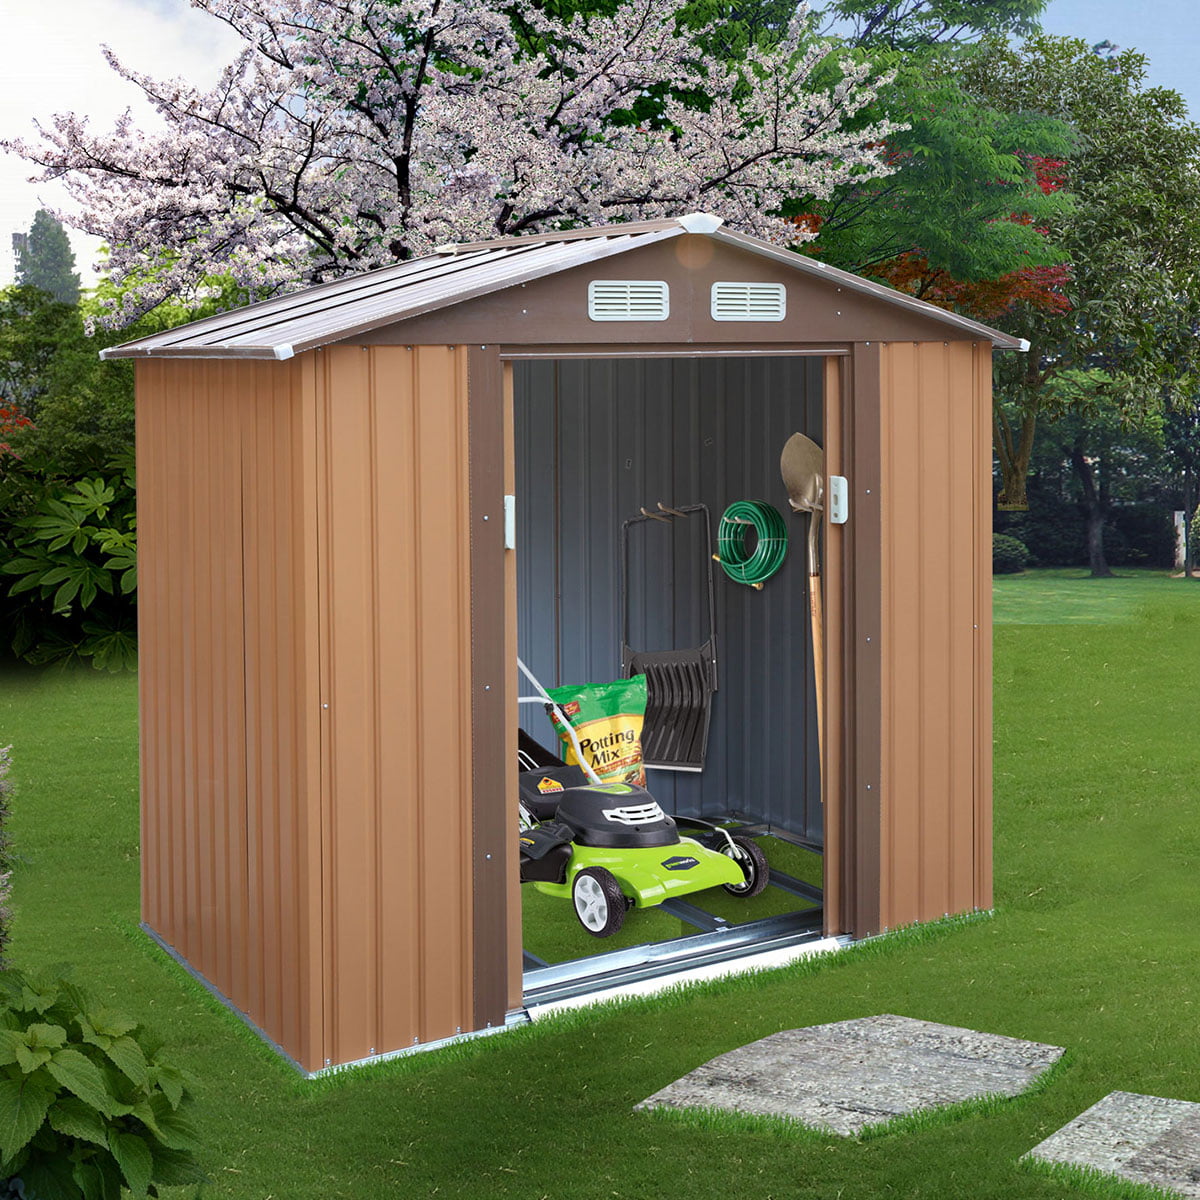 Jaxpety 7' x 4' Outdoor Backyard Garden Metal Storage Shed for Utility Tool Storage, Gable Roof